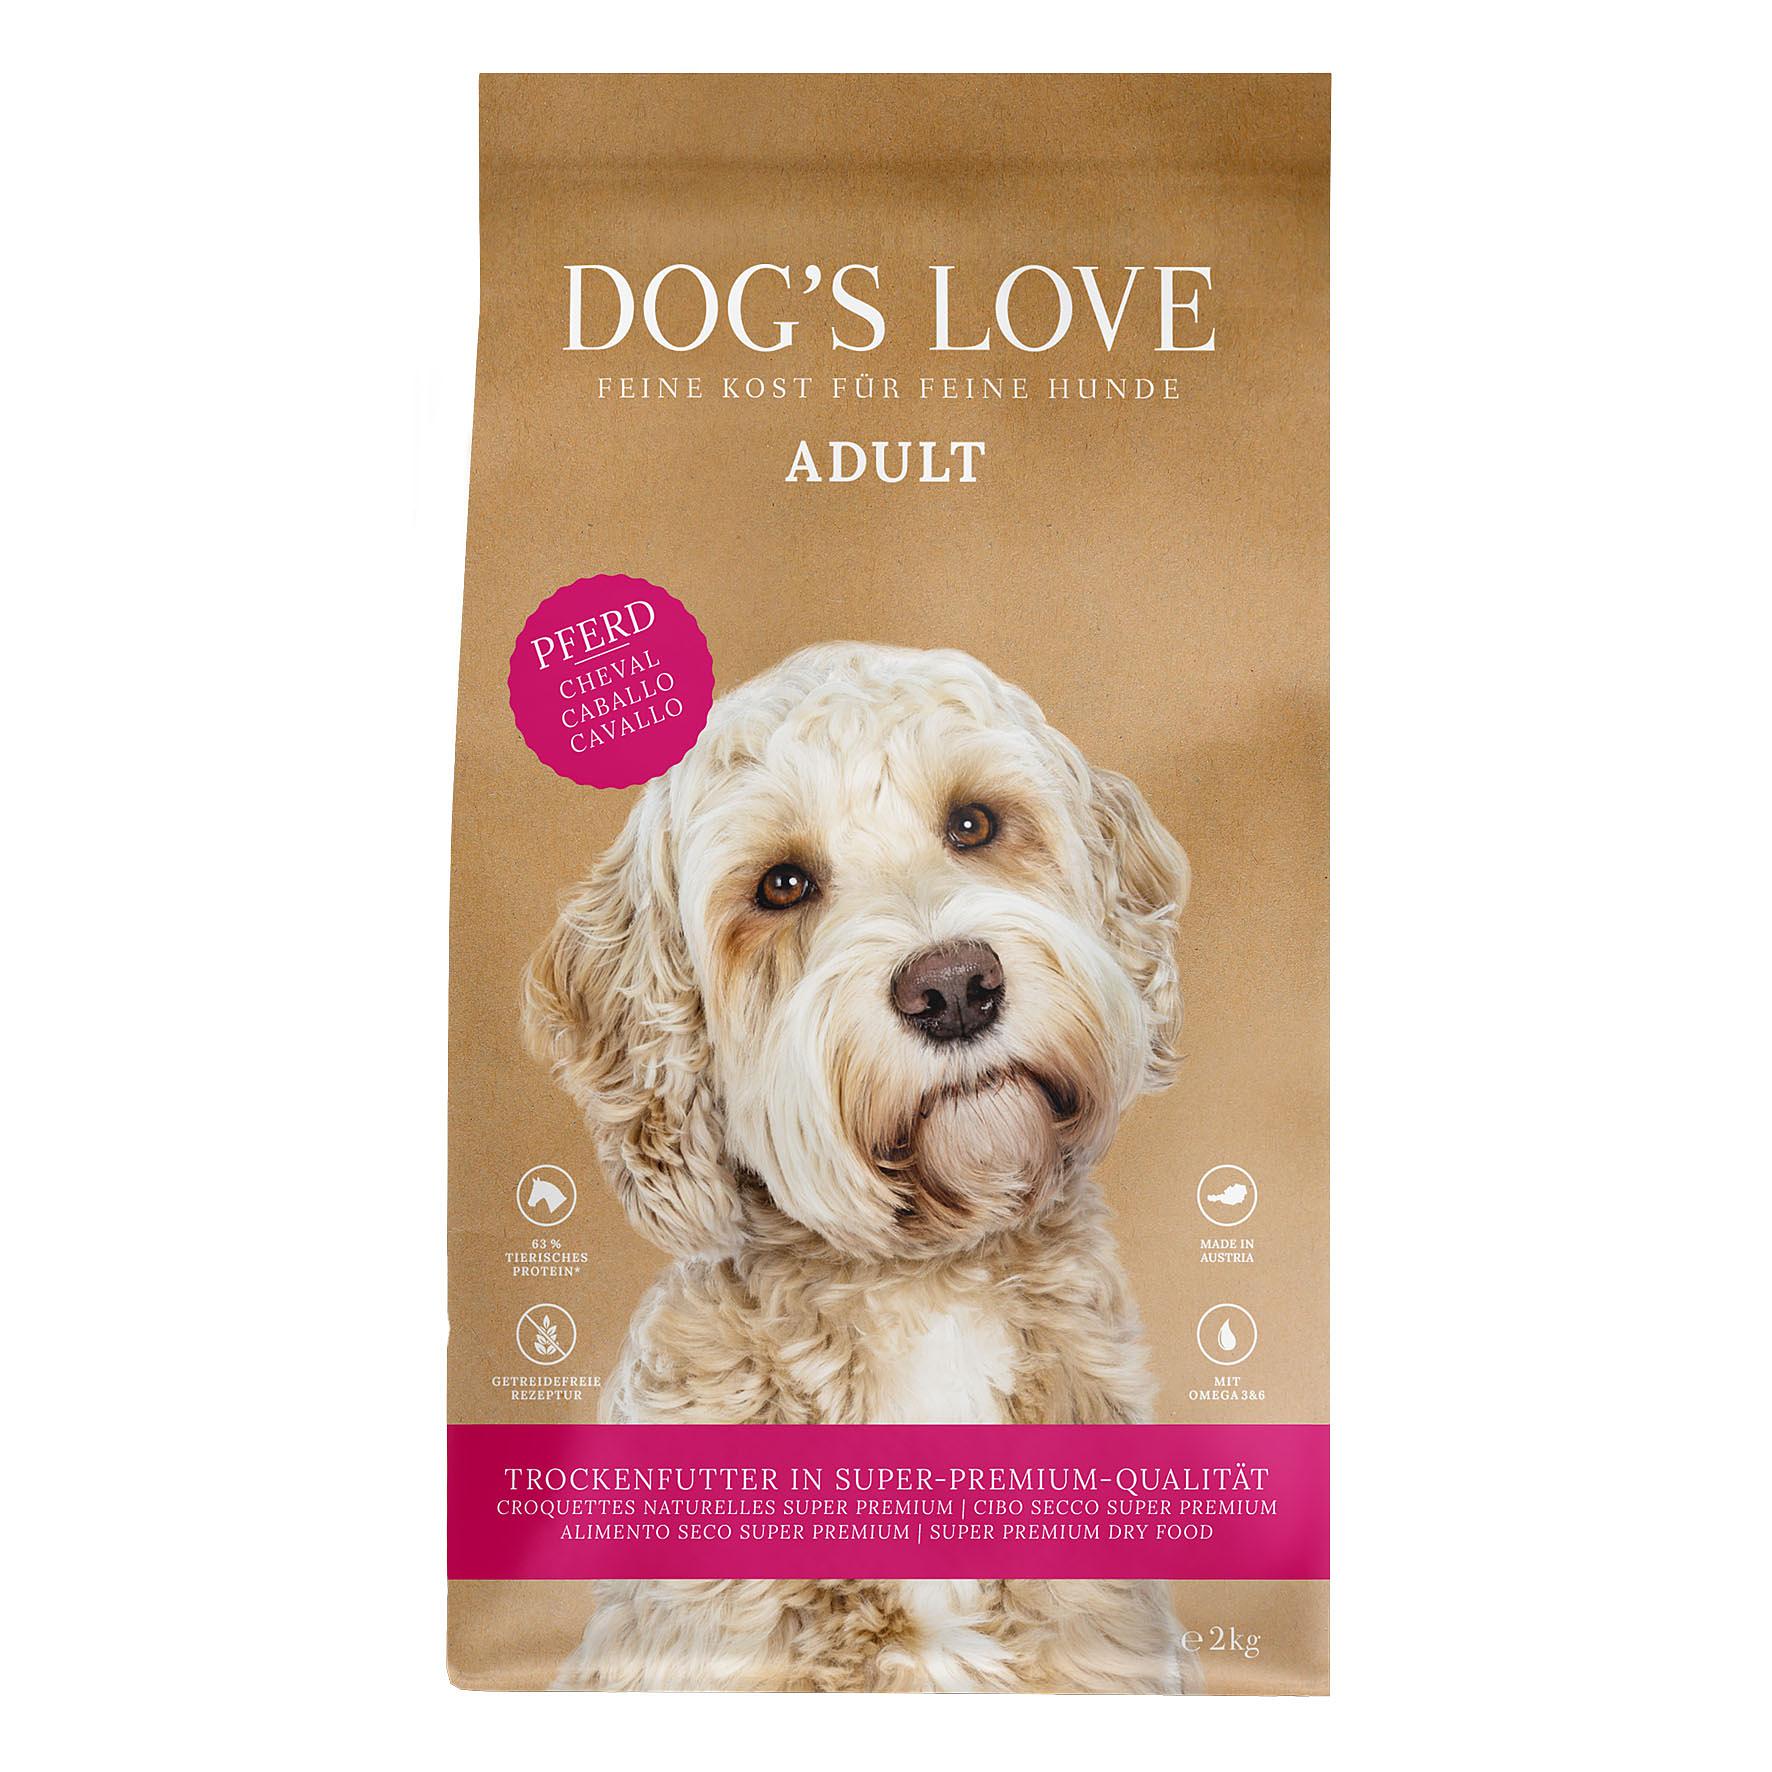 Dog's Love cheval, patate douce & pommes